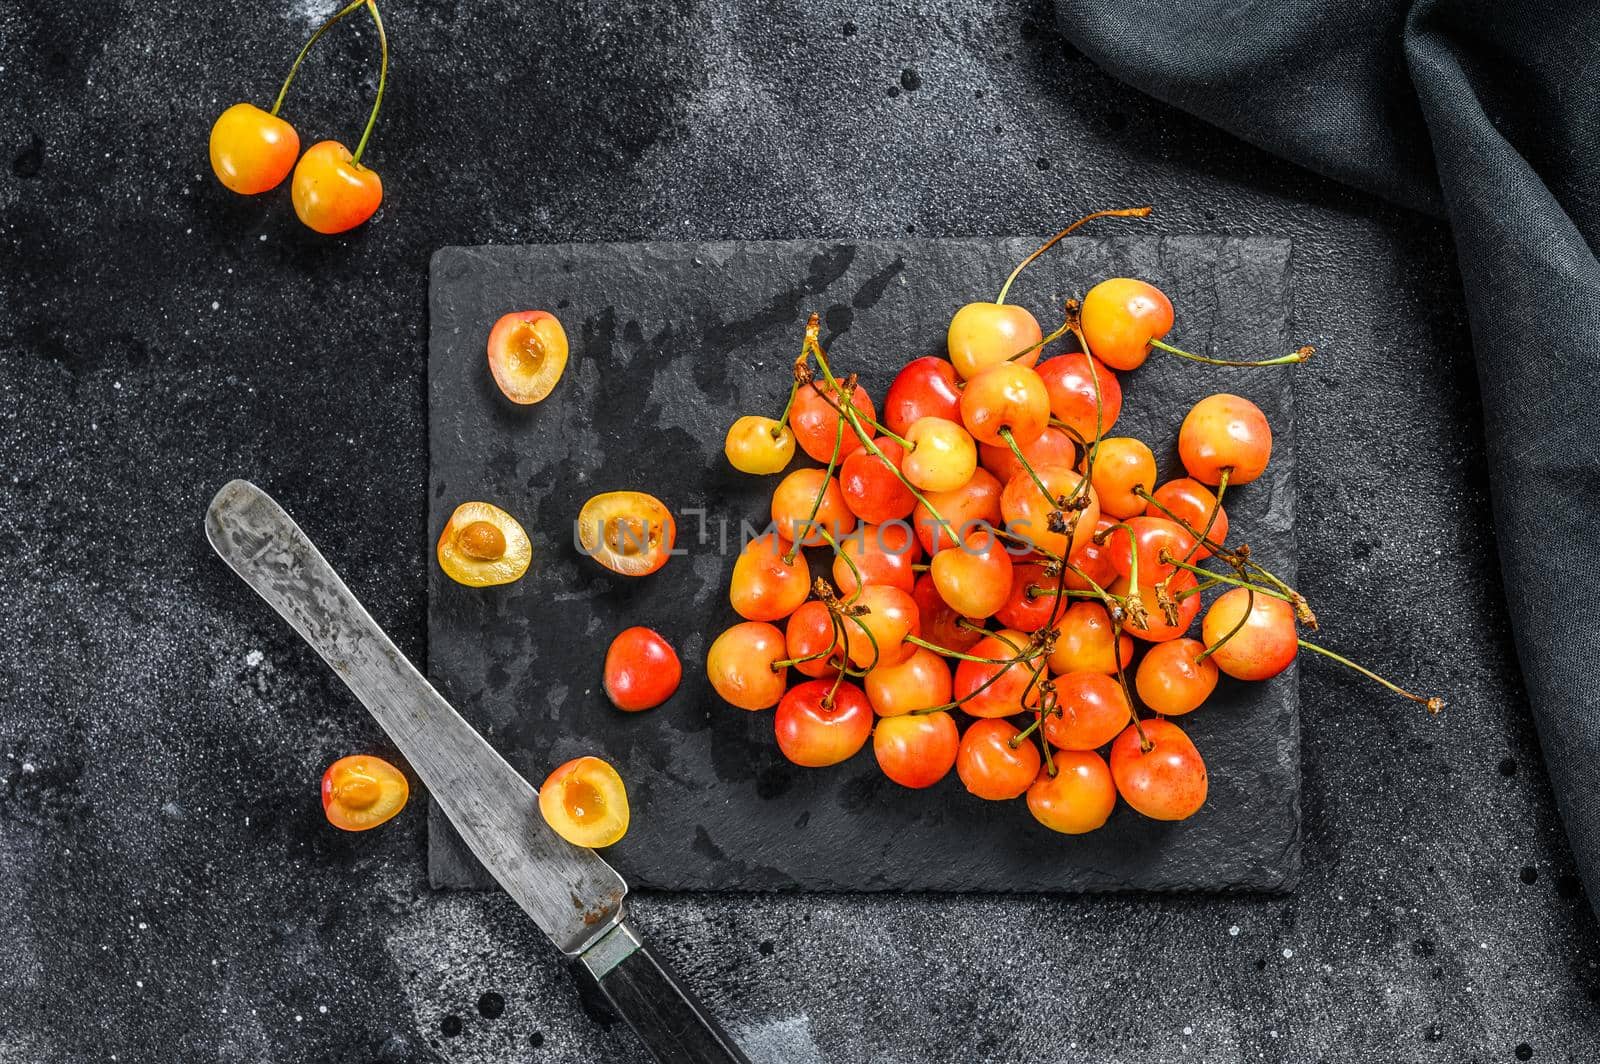 Yellow ripe cherries on a black plate. Black background. Top view.